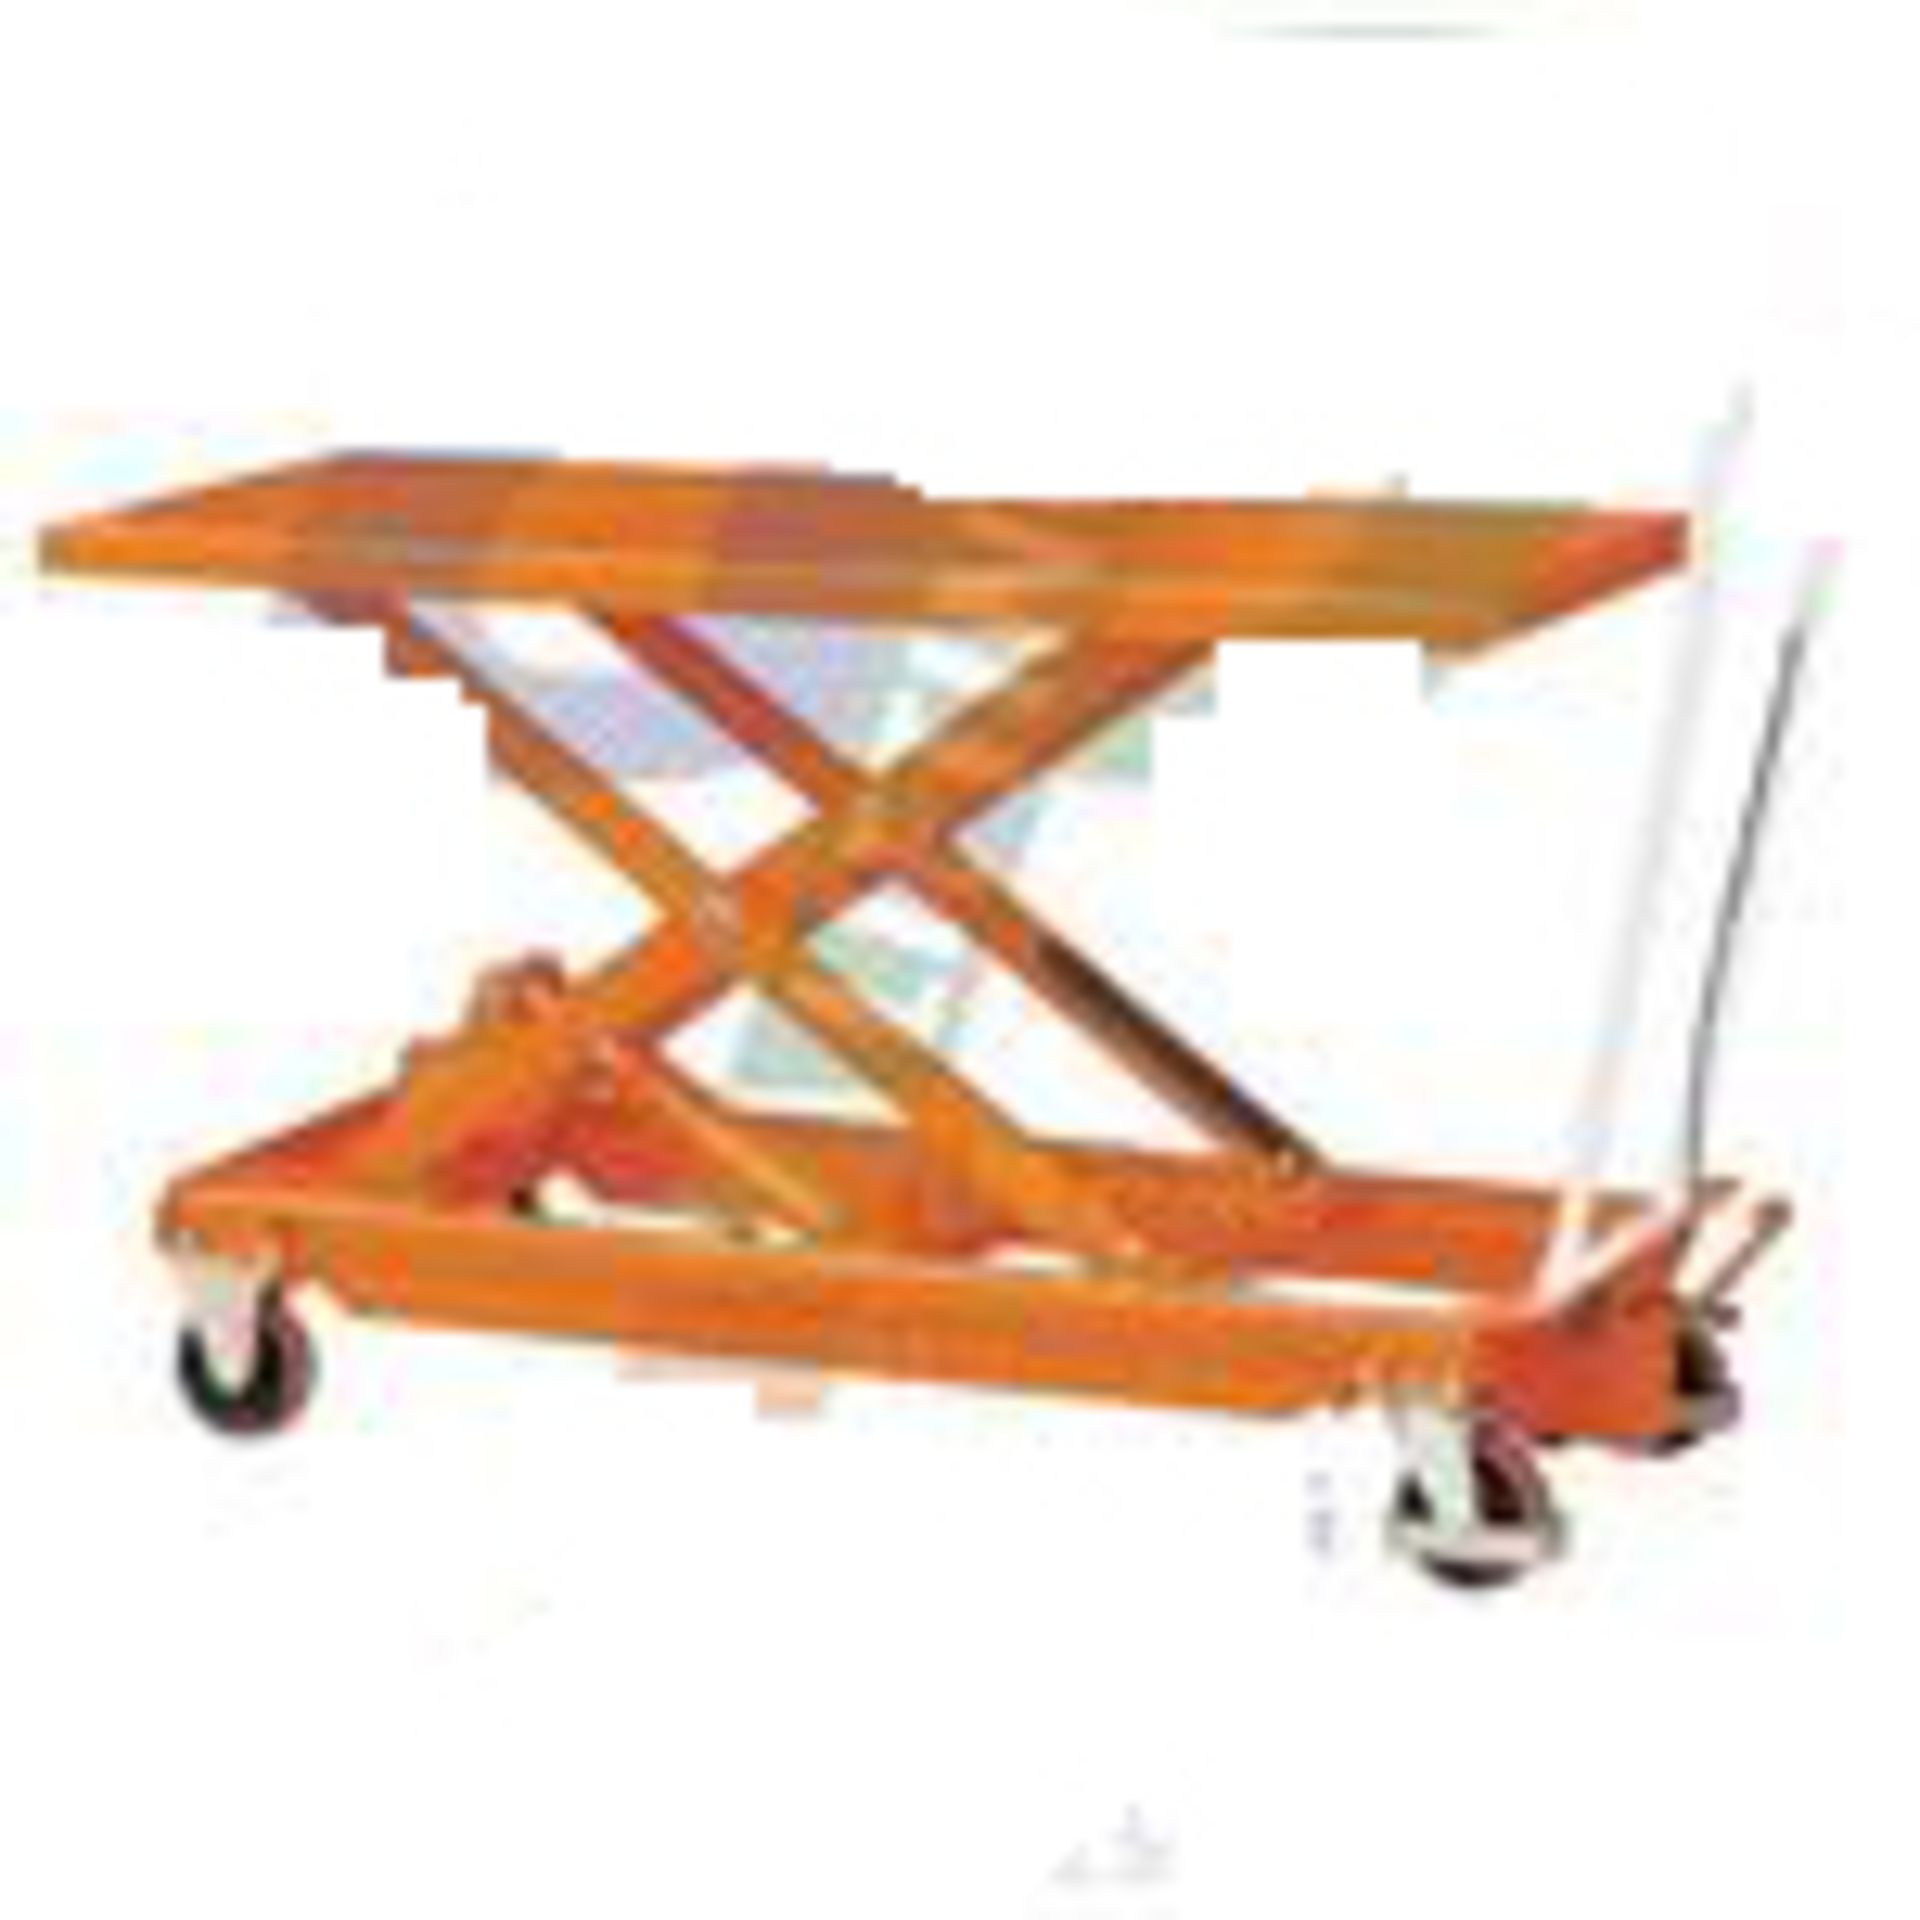 1 X 350KG INCLINE TYPE LIFT TABLE - BRAND NEW
Economic and reliable range.
 New design to meet